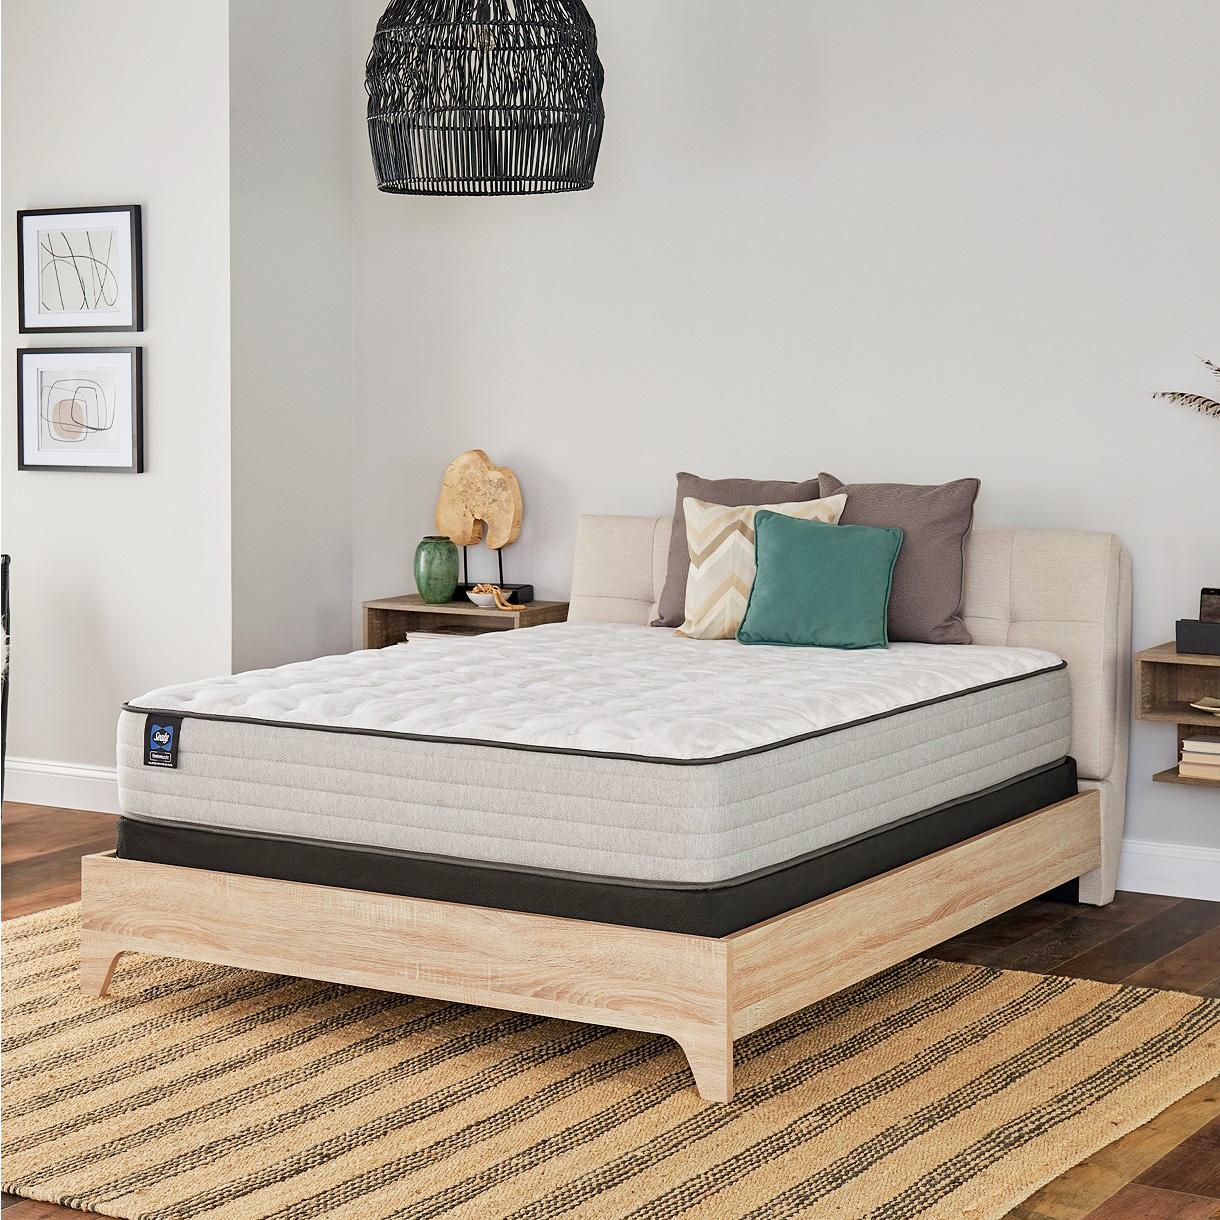 Sealy Posturepedic Spring Bloom 12in Medium Queen Mattress for $399 Shipped